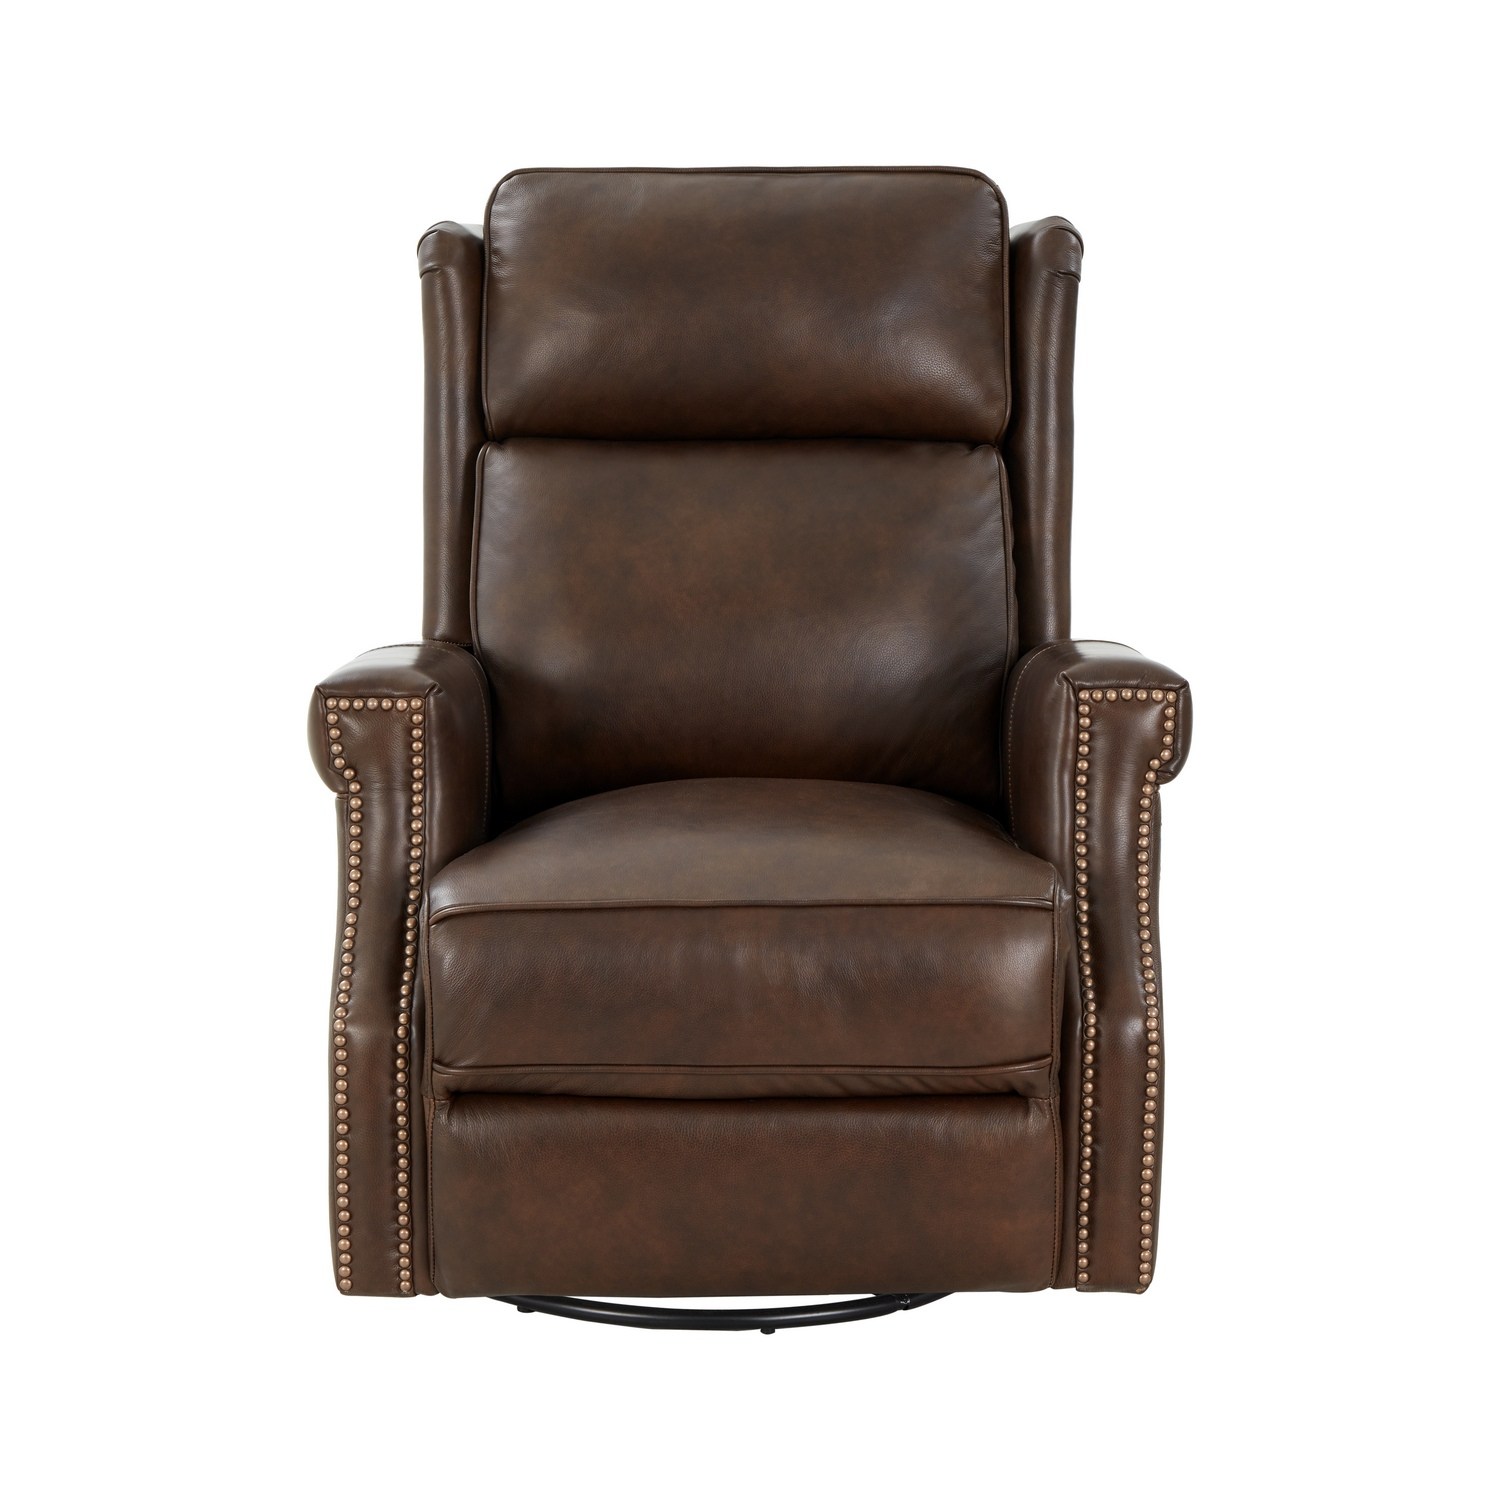 Barcalounger Brookmore Swivel Glider Recliner Chair with Power Recline and Power Head Rest - Ashford Walnut/All Leather